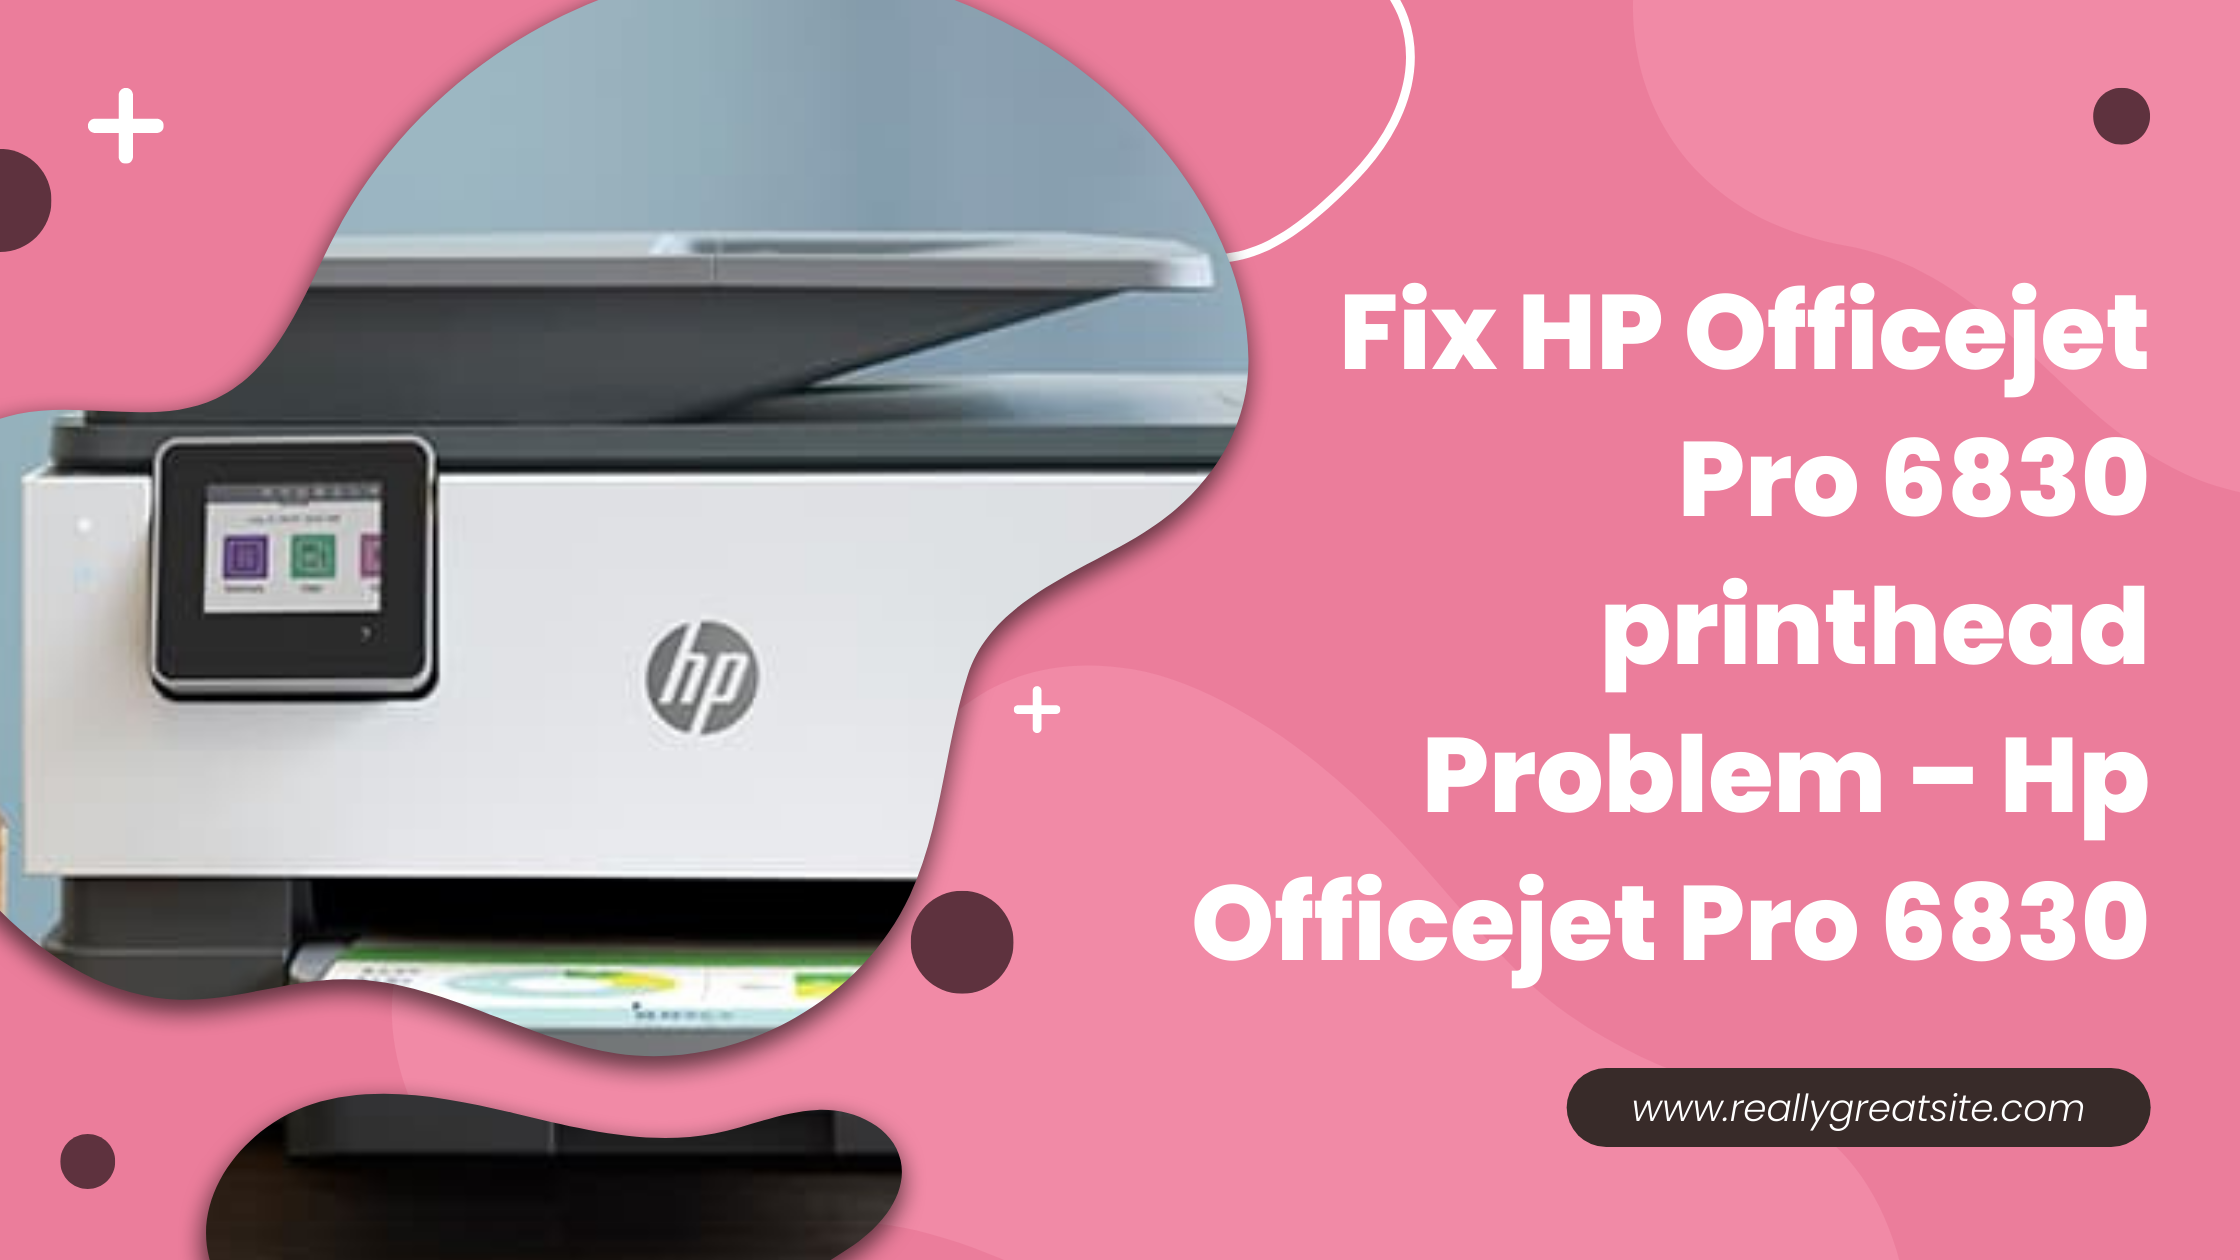 Is There a Reason for HP Officejet Pro 6830 Printhead Problems?